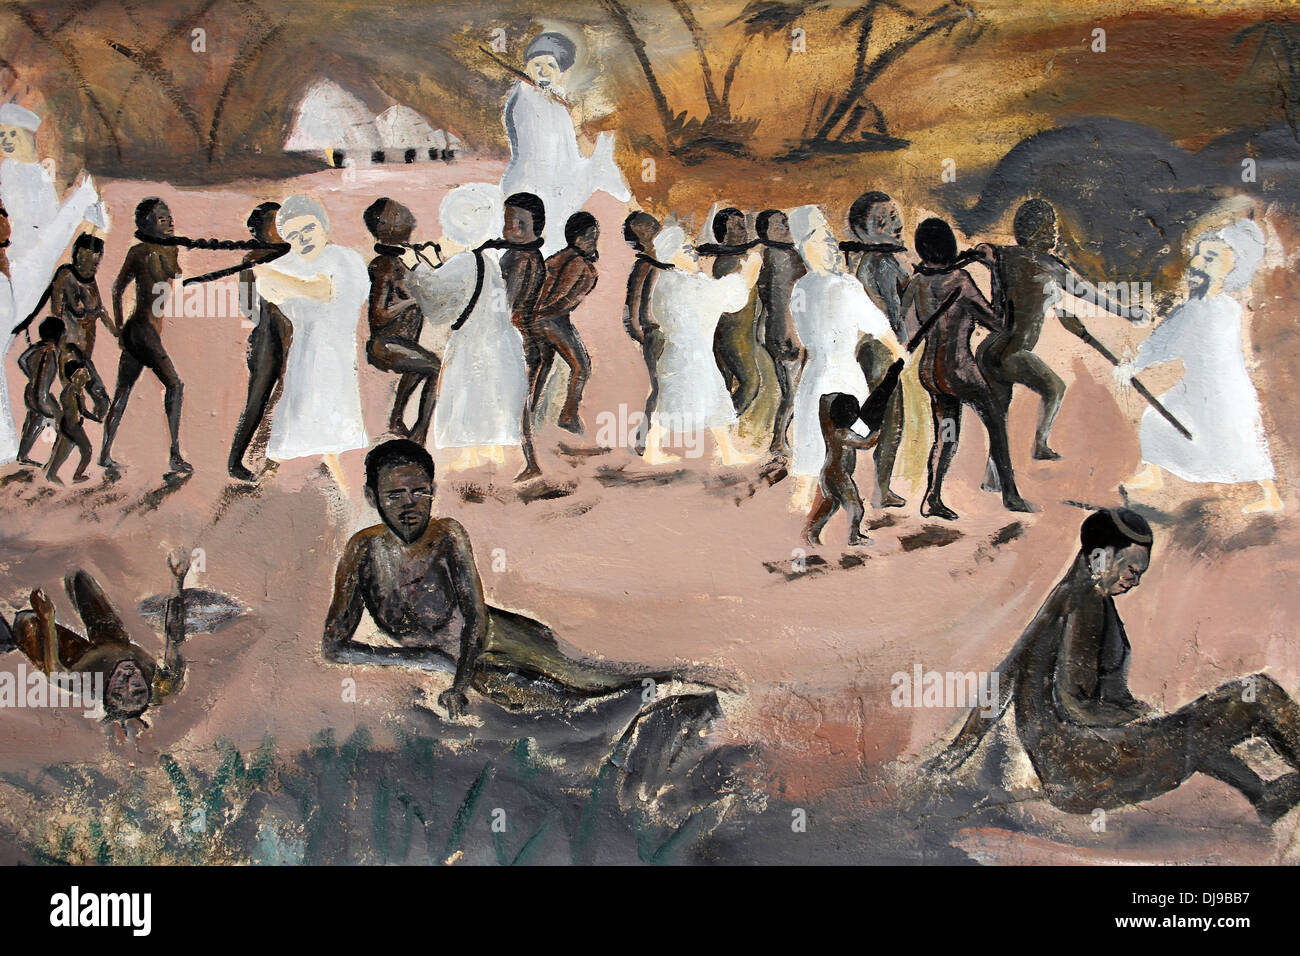 Mural Depicting the Capture Of Slaves Stock Photo